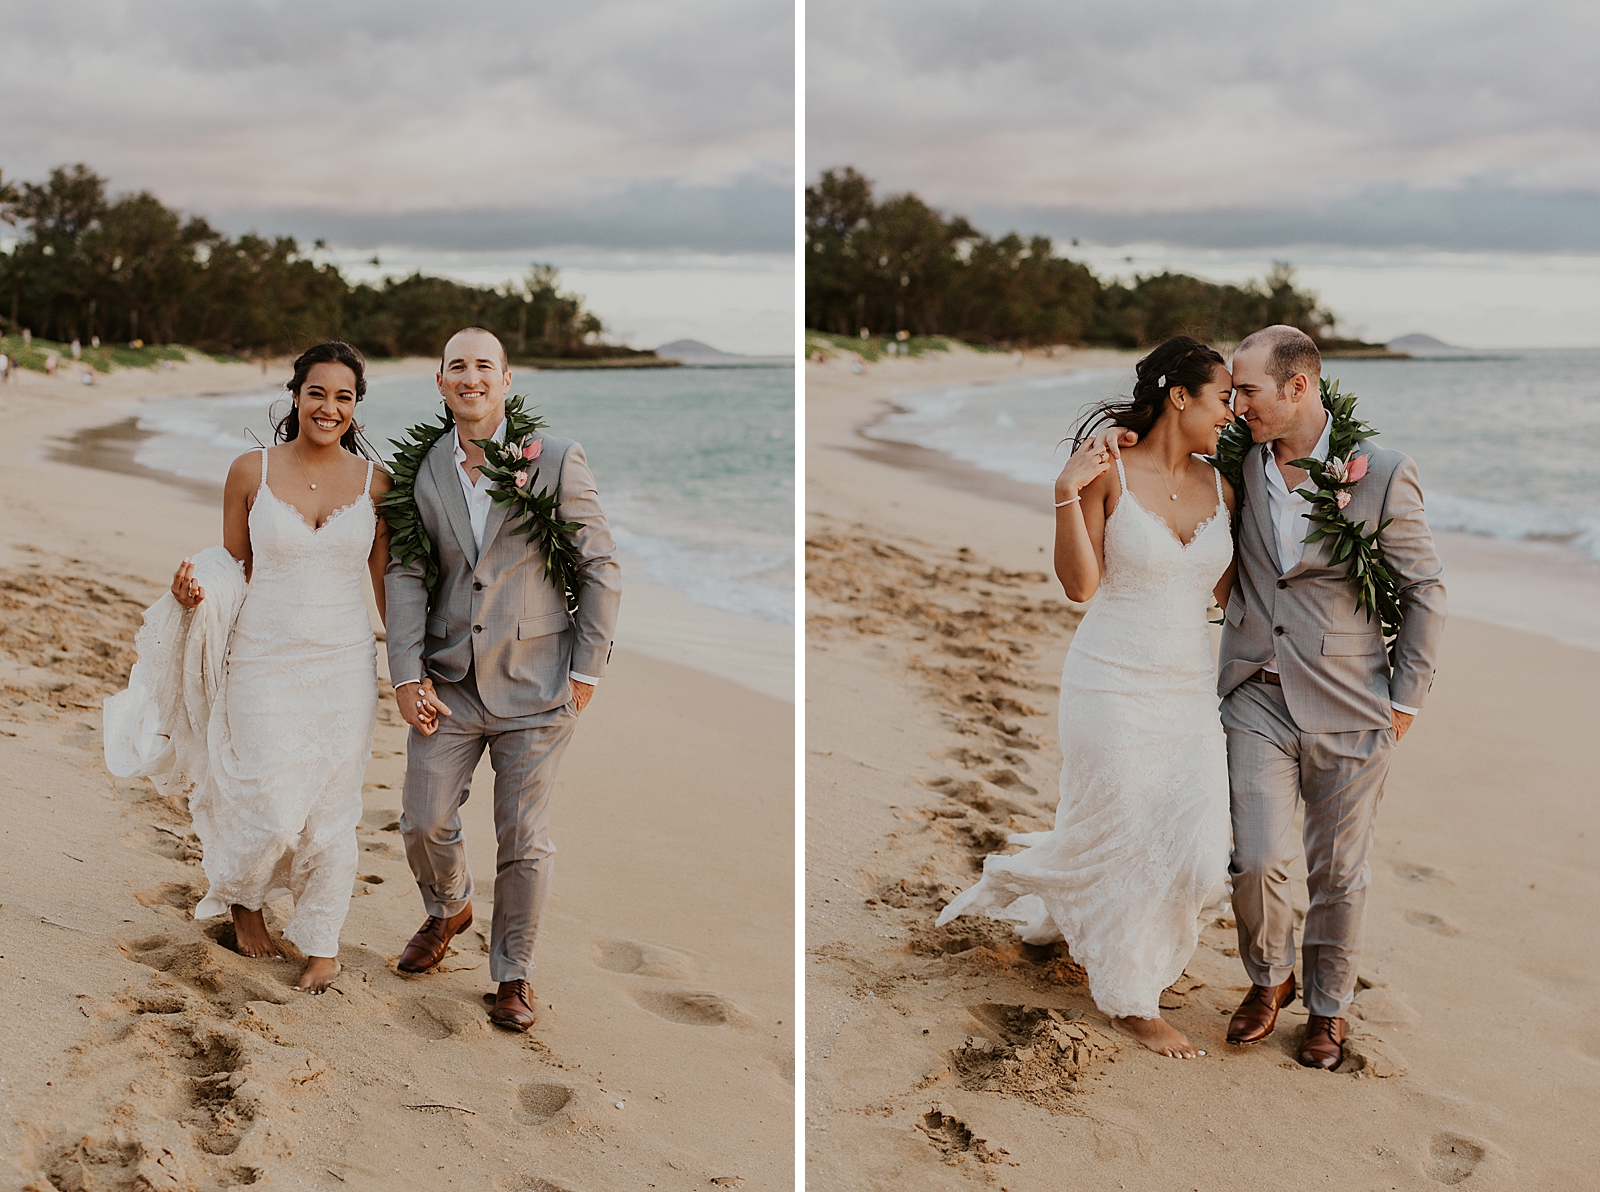 Bride and Groom holding hands and walking on the sand together on the beach